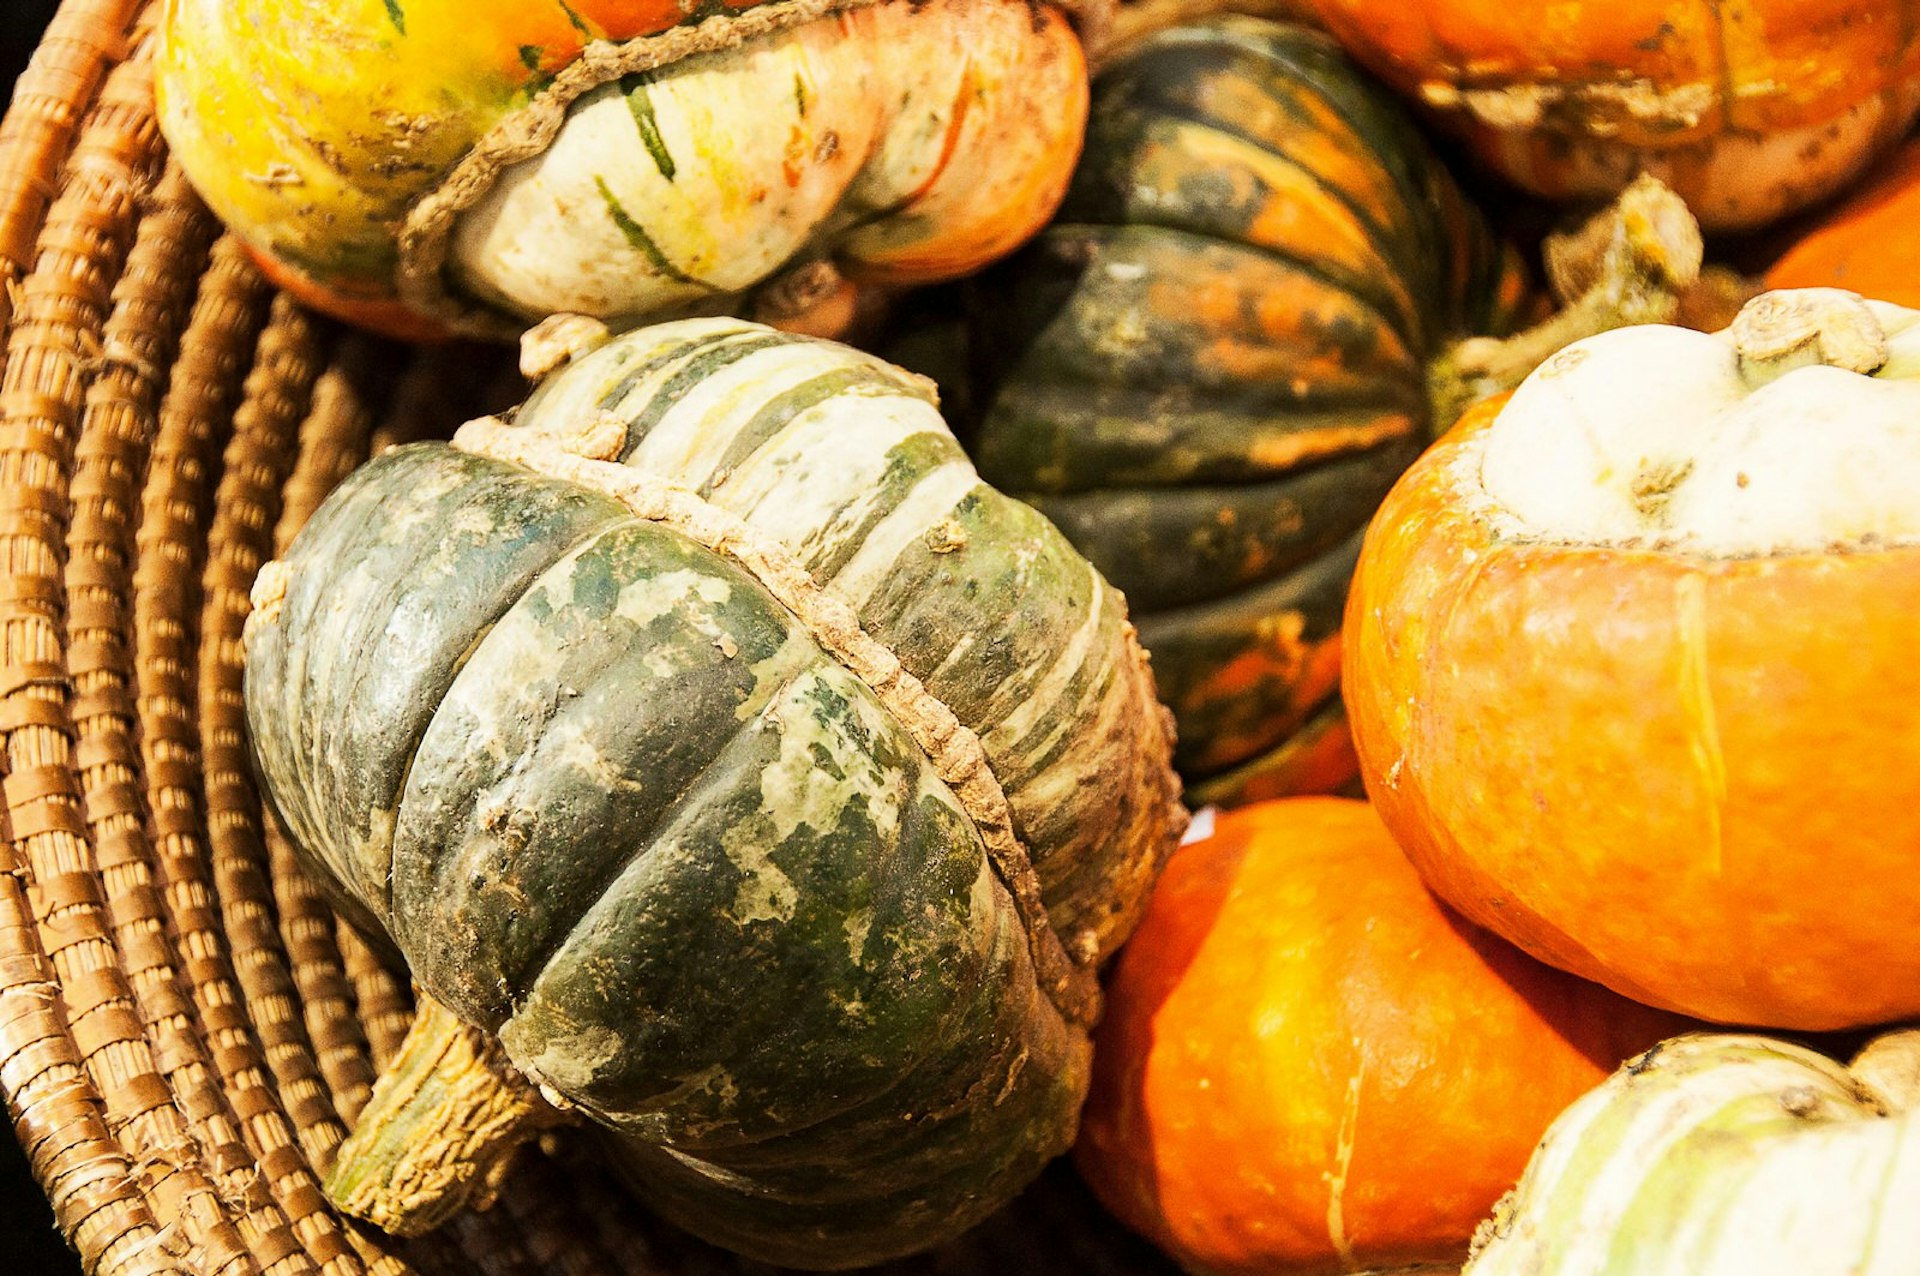 Features - Organic Pumpkins for sale at street market